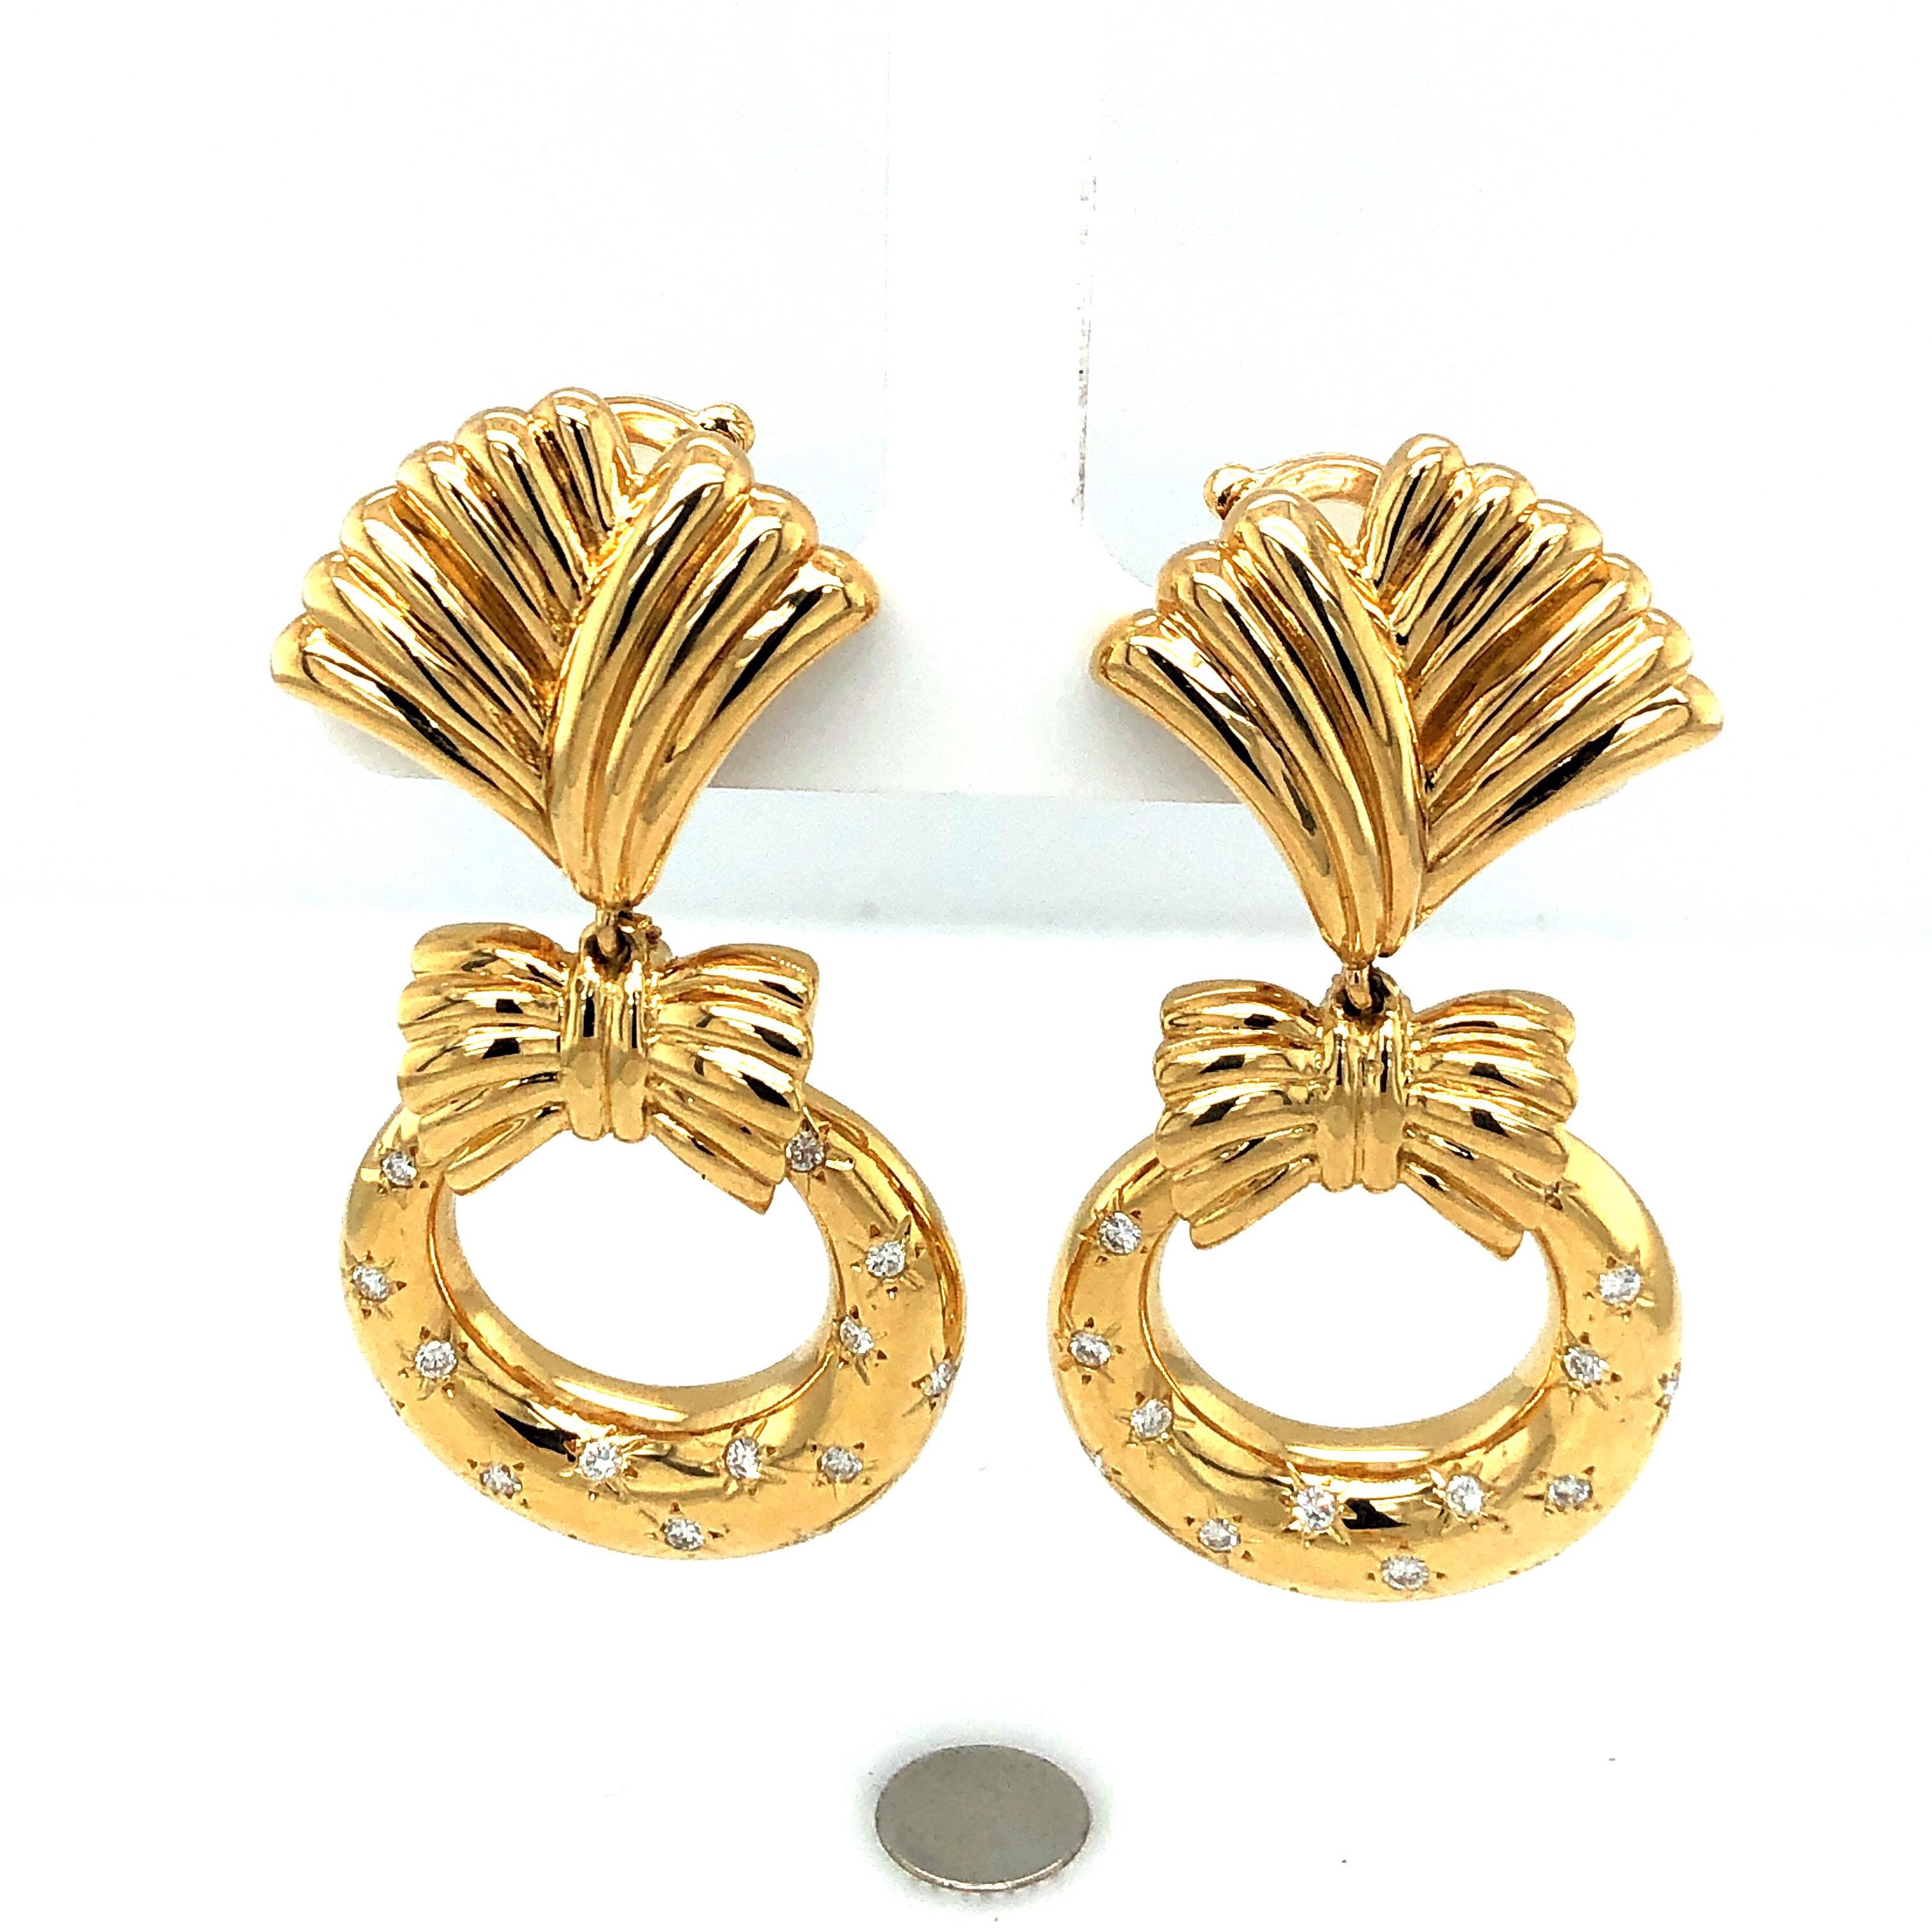 Women's Van Cleef & Arpels Clip-On Yellow Gold Vintage Earrings Diamonds and Charms